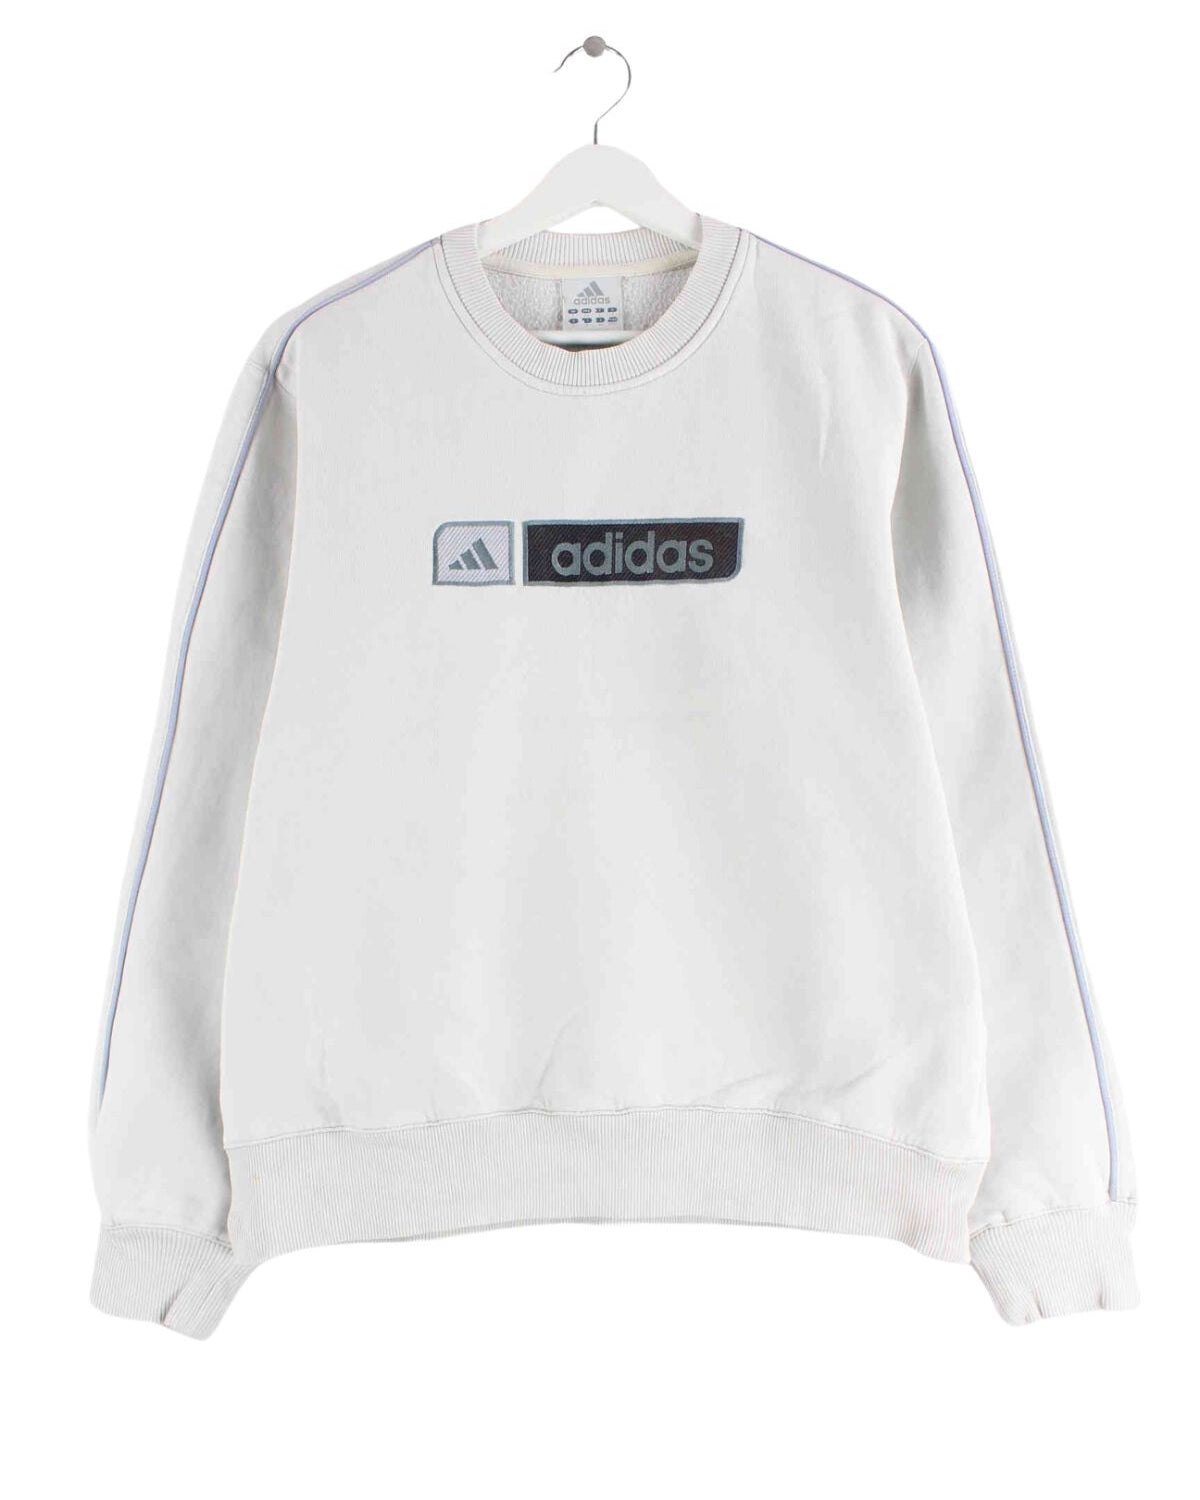 Adidas y2k Embroidered Sweater Beige S (front image)